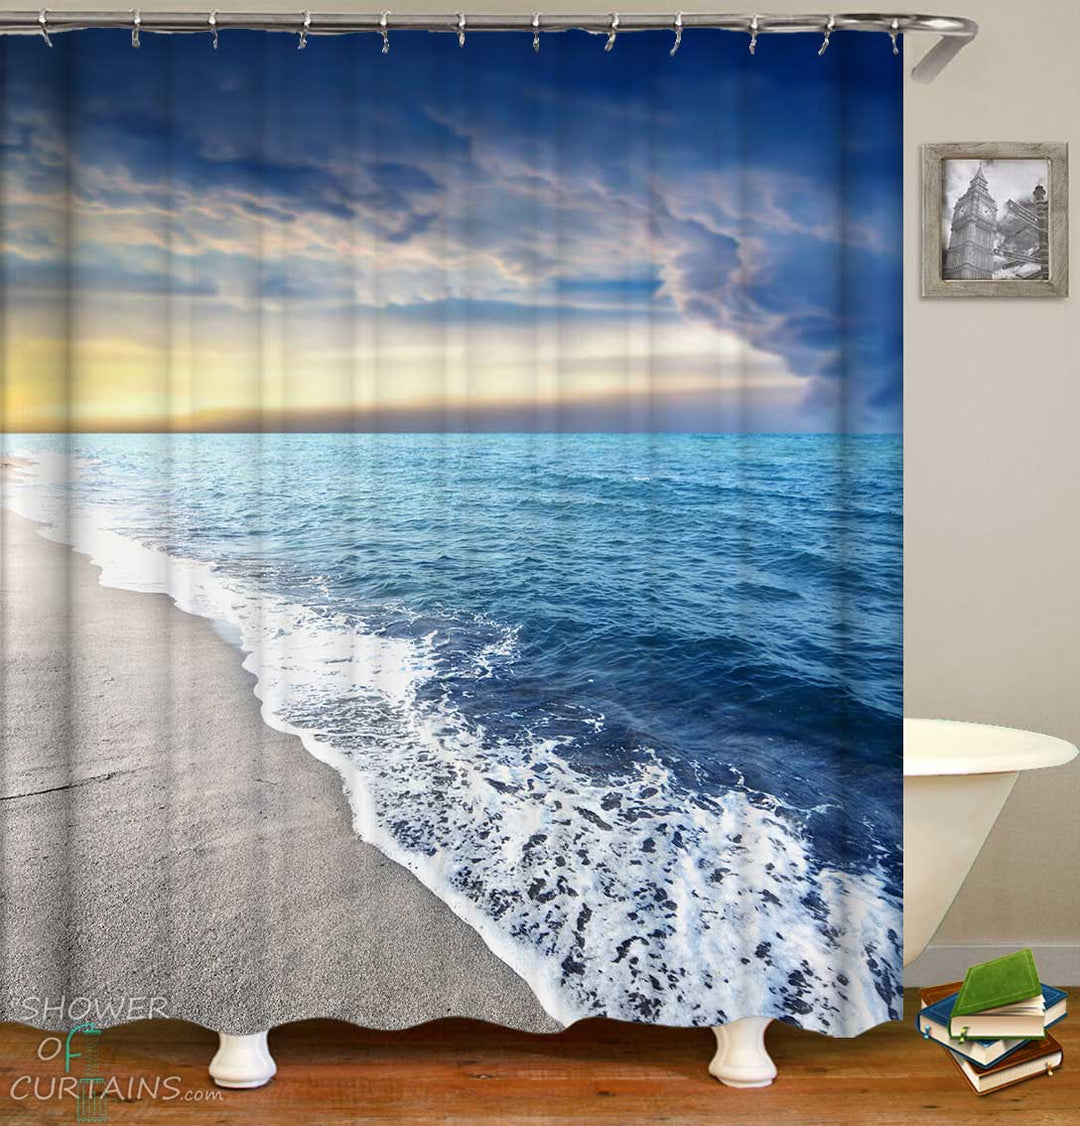 Shower Curtains with Beautiful Blue Ocean